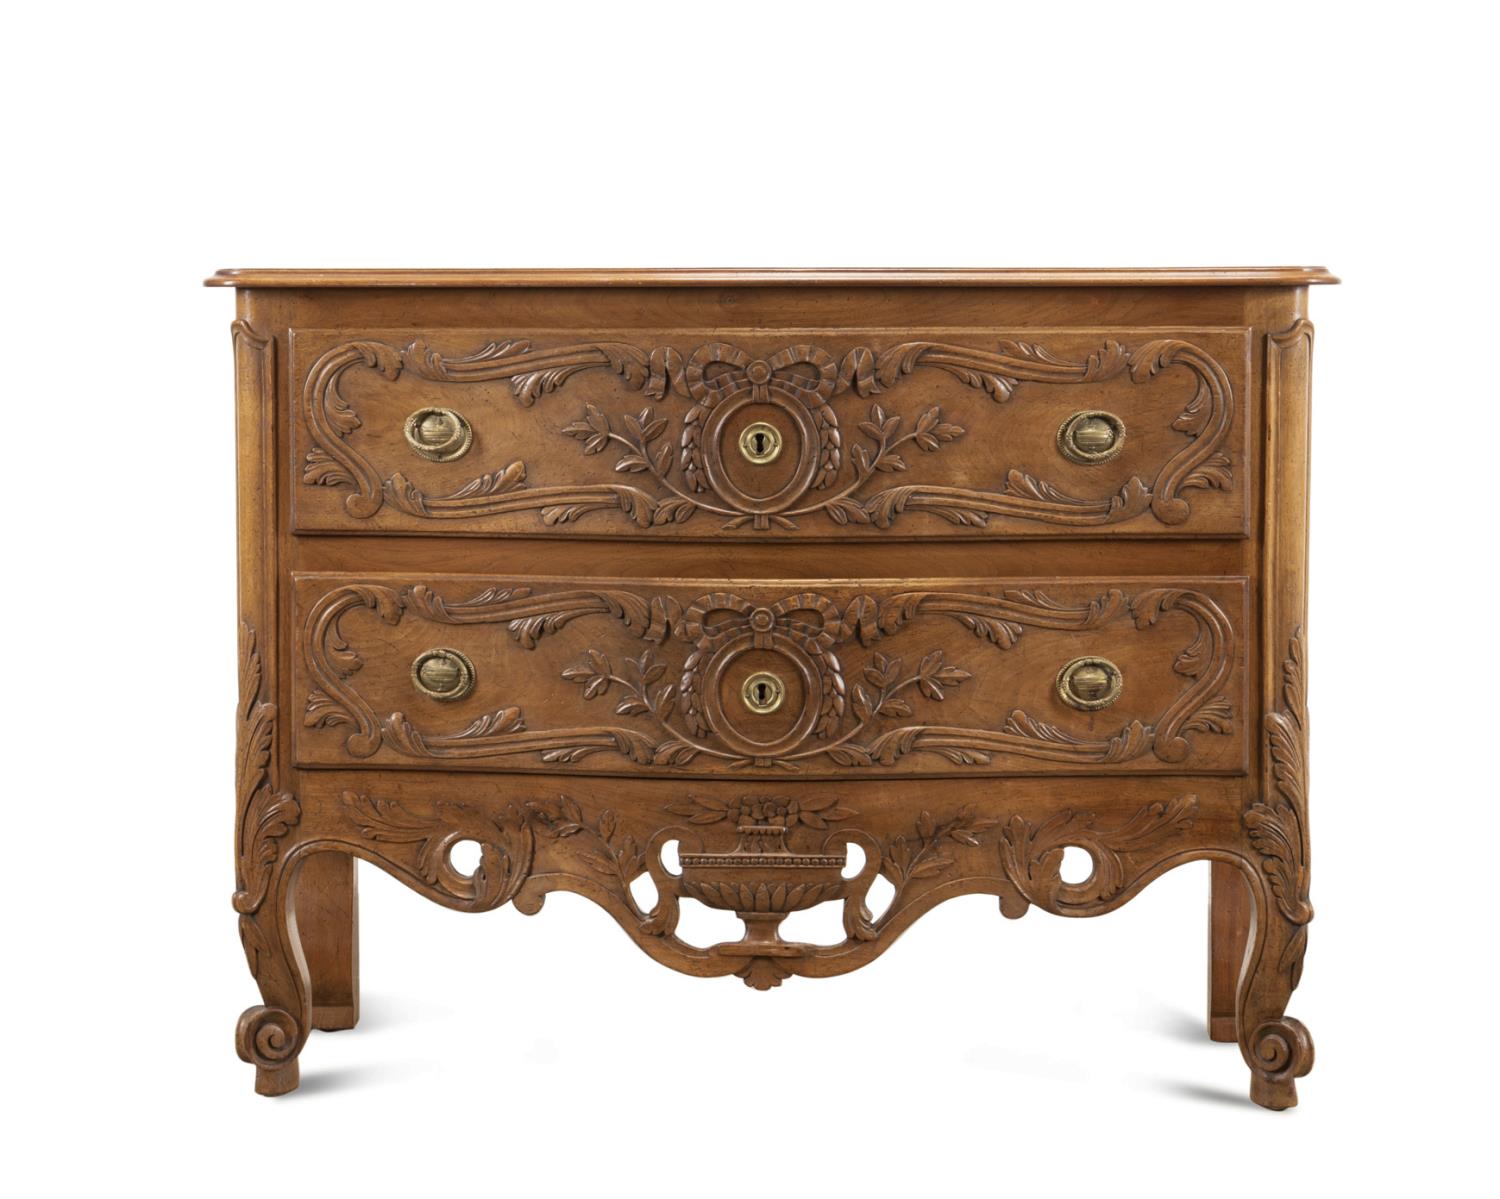 DON RUSEAU FRENCH PROVINCIAL STYLE